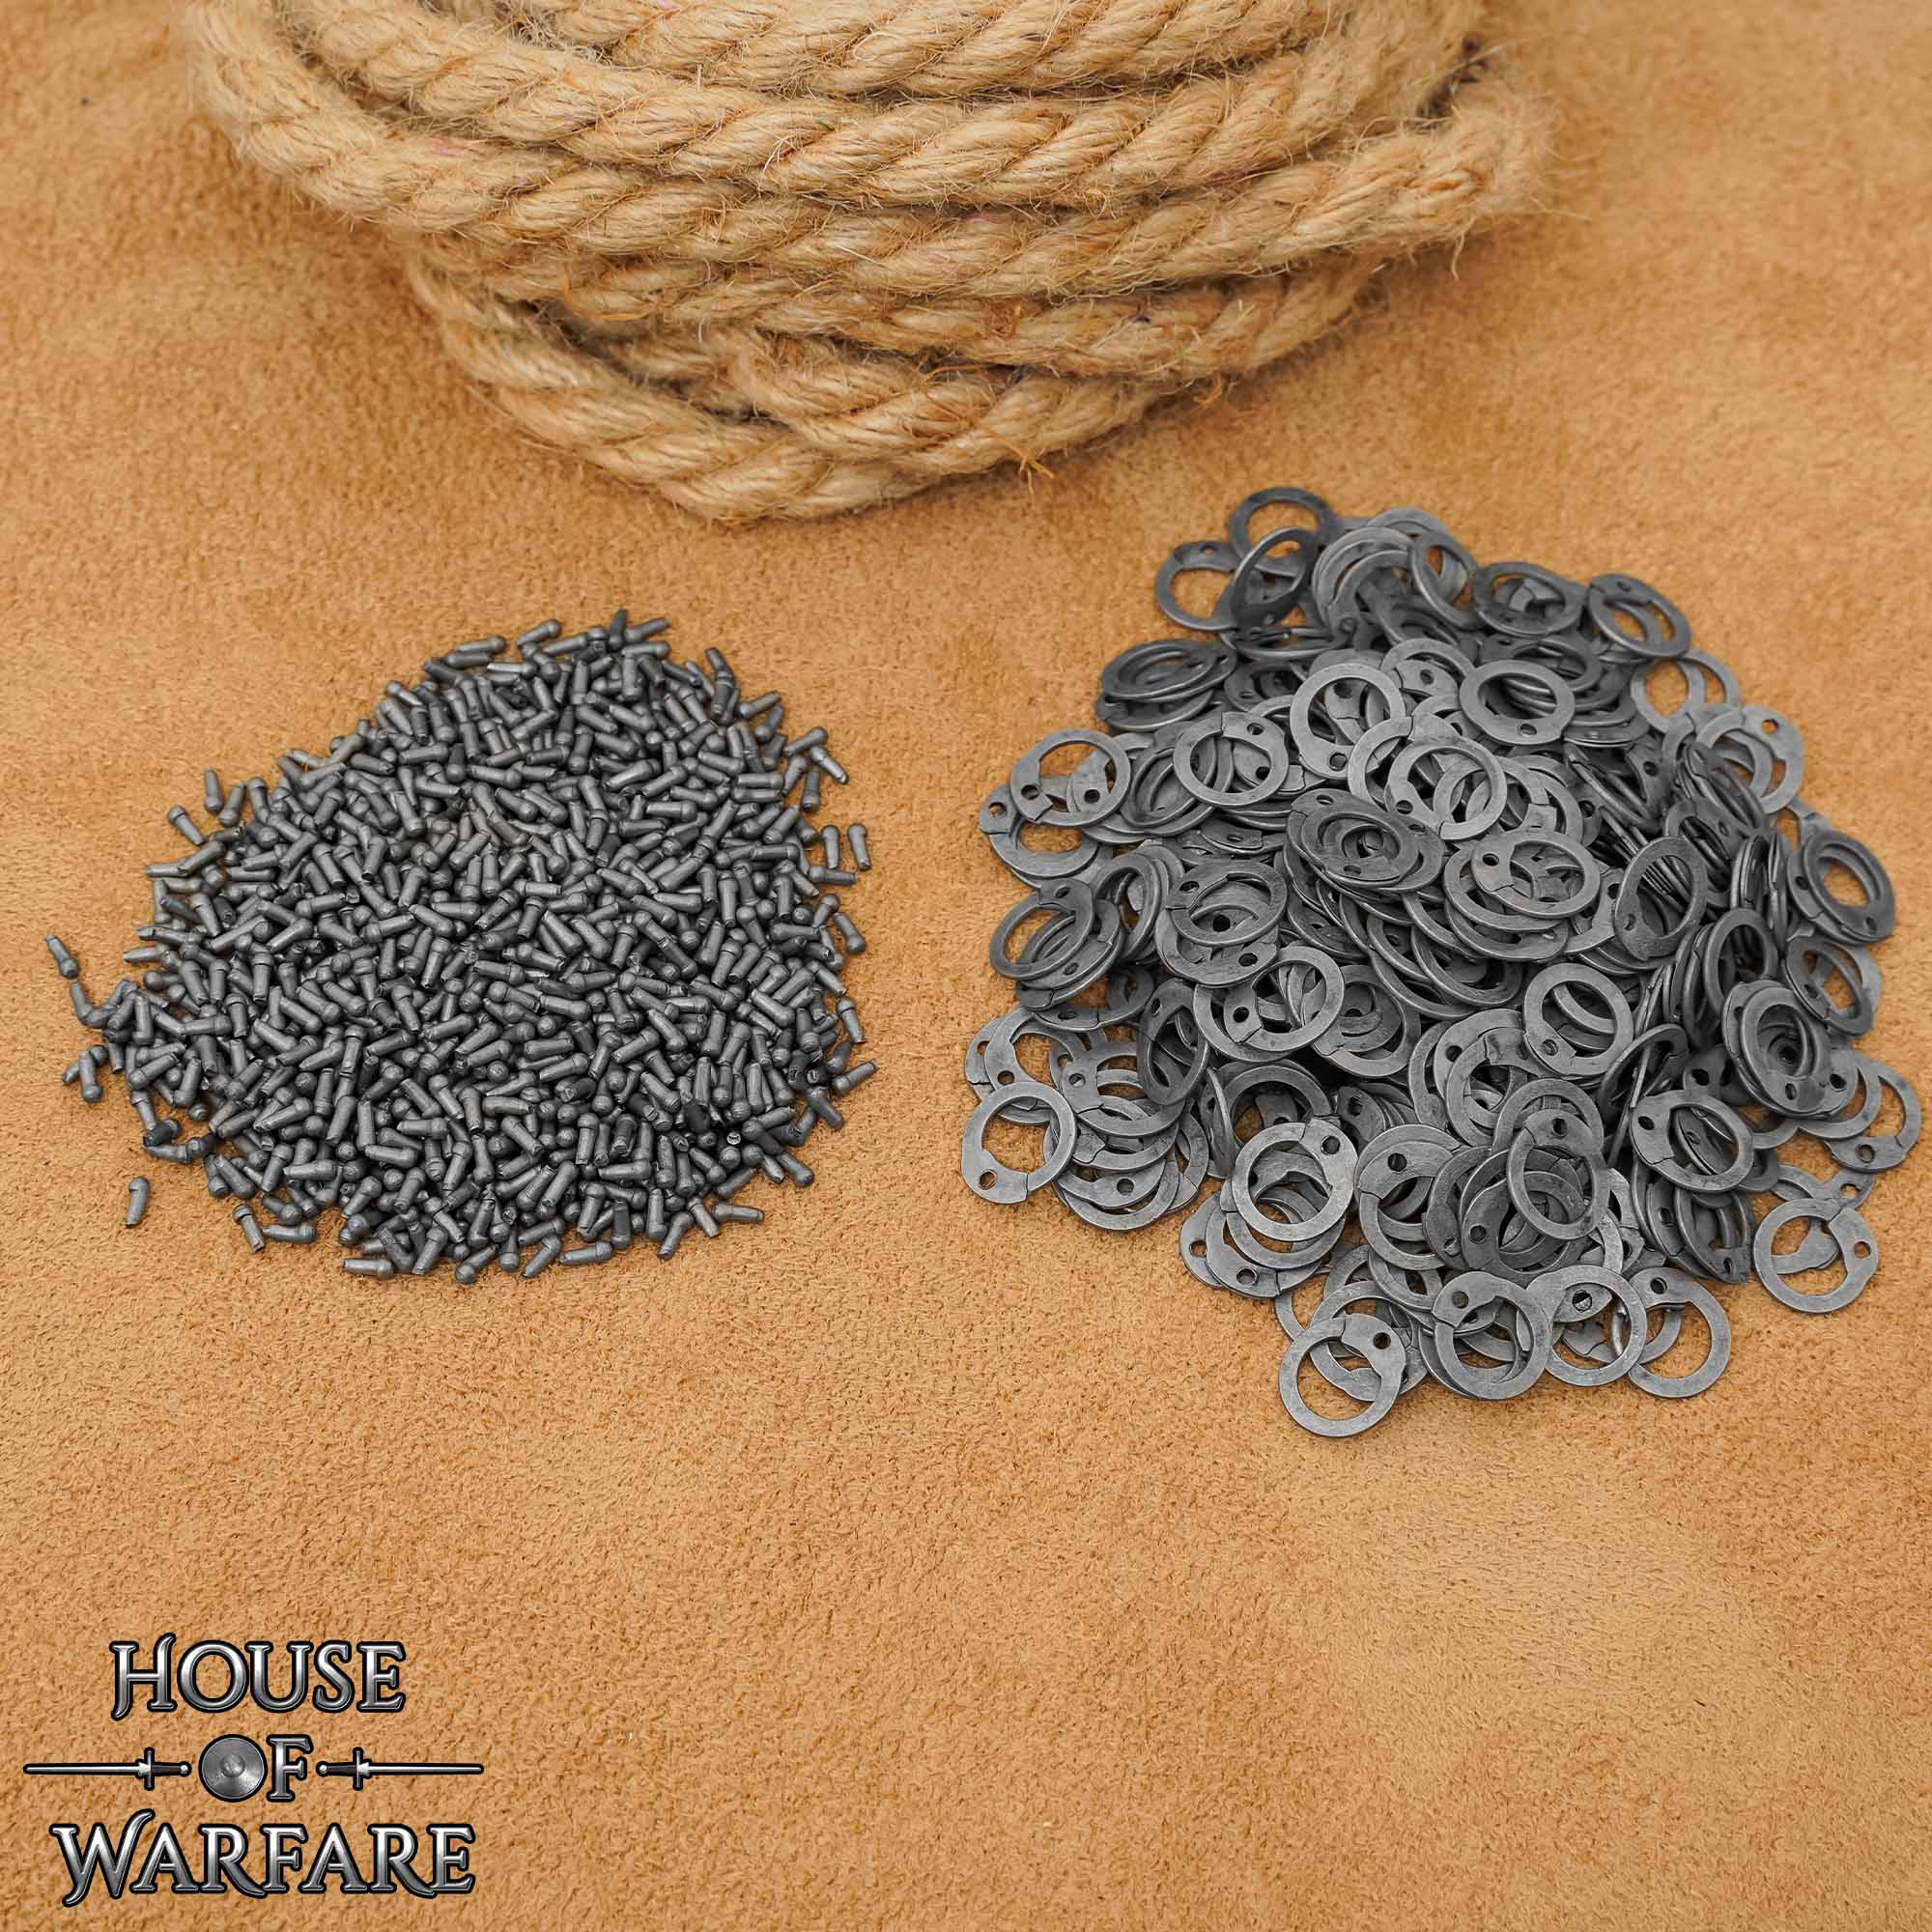 Chainmail Wedge Riveted Haubergeon at best price in Meerut